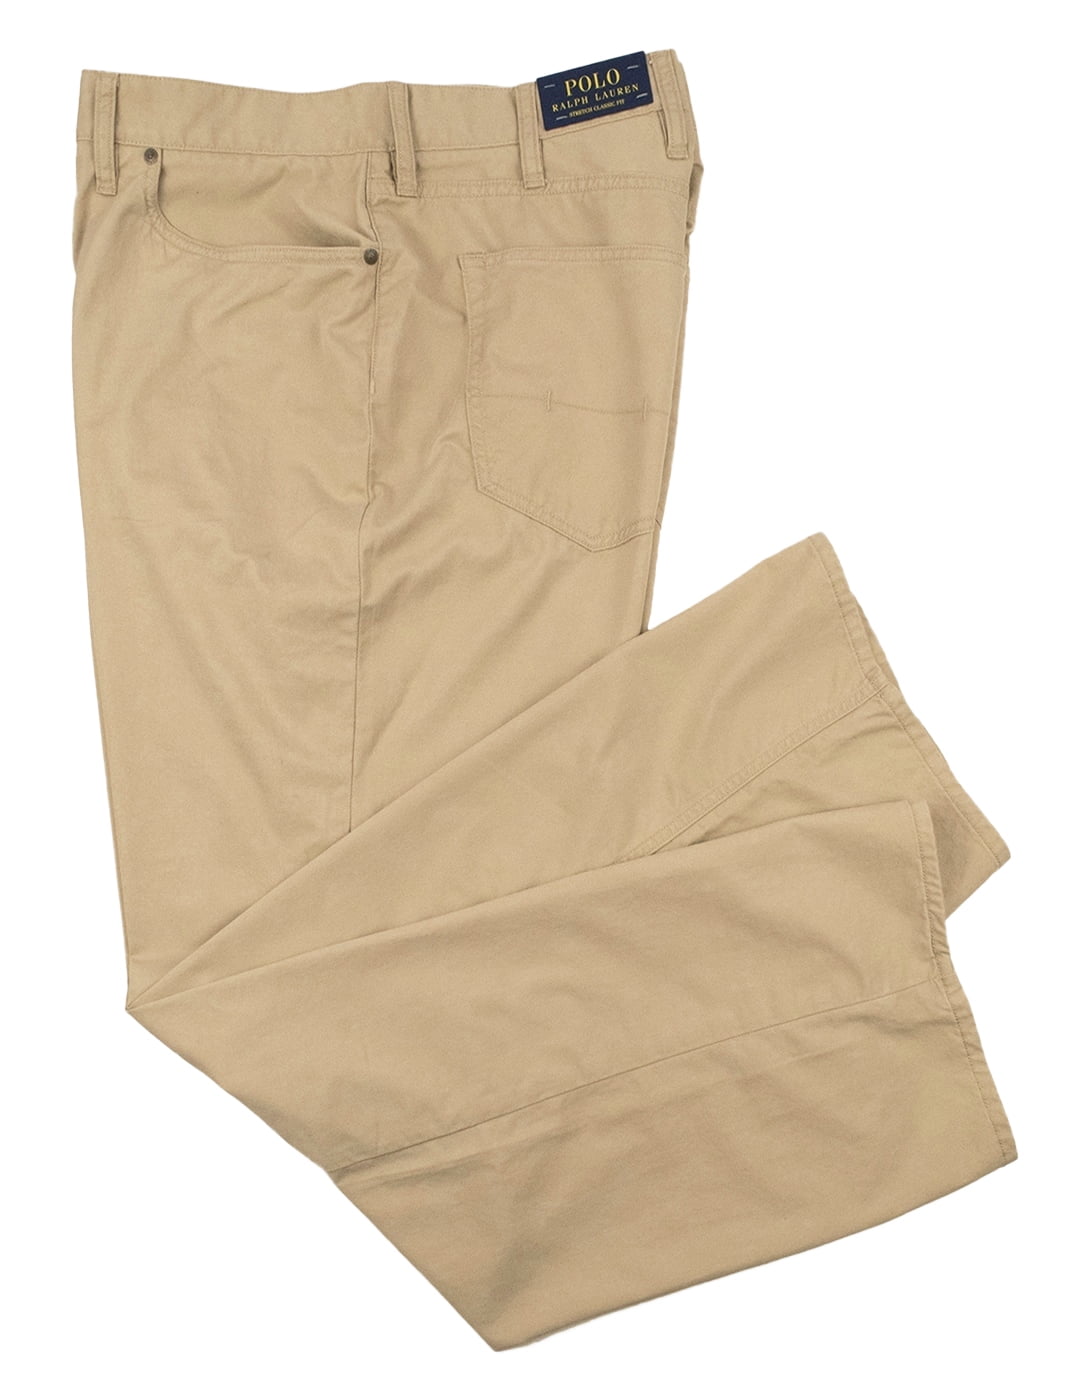 polo stretch classic fit pants